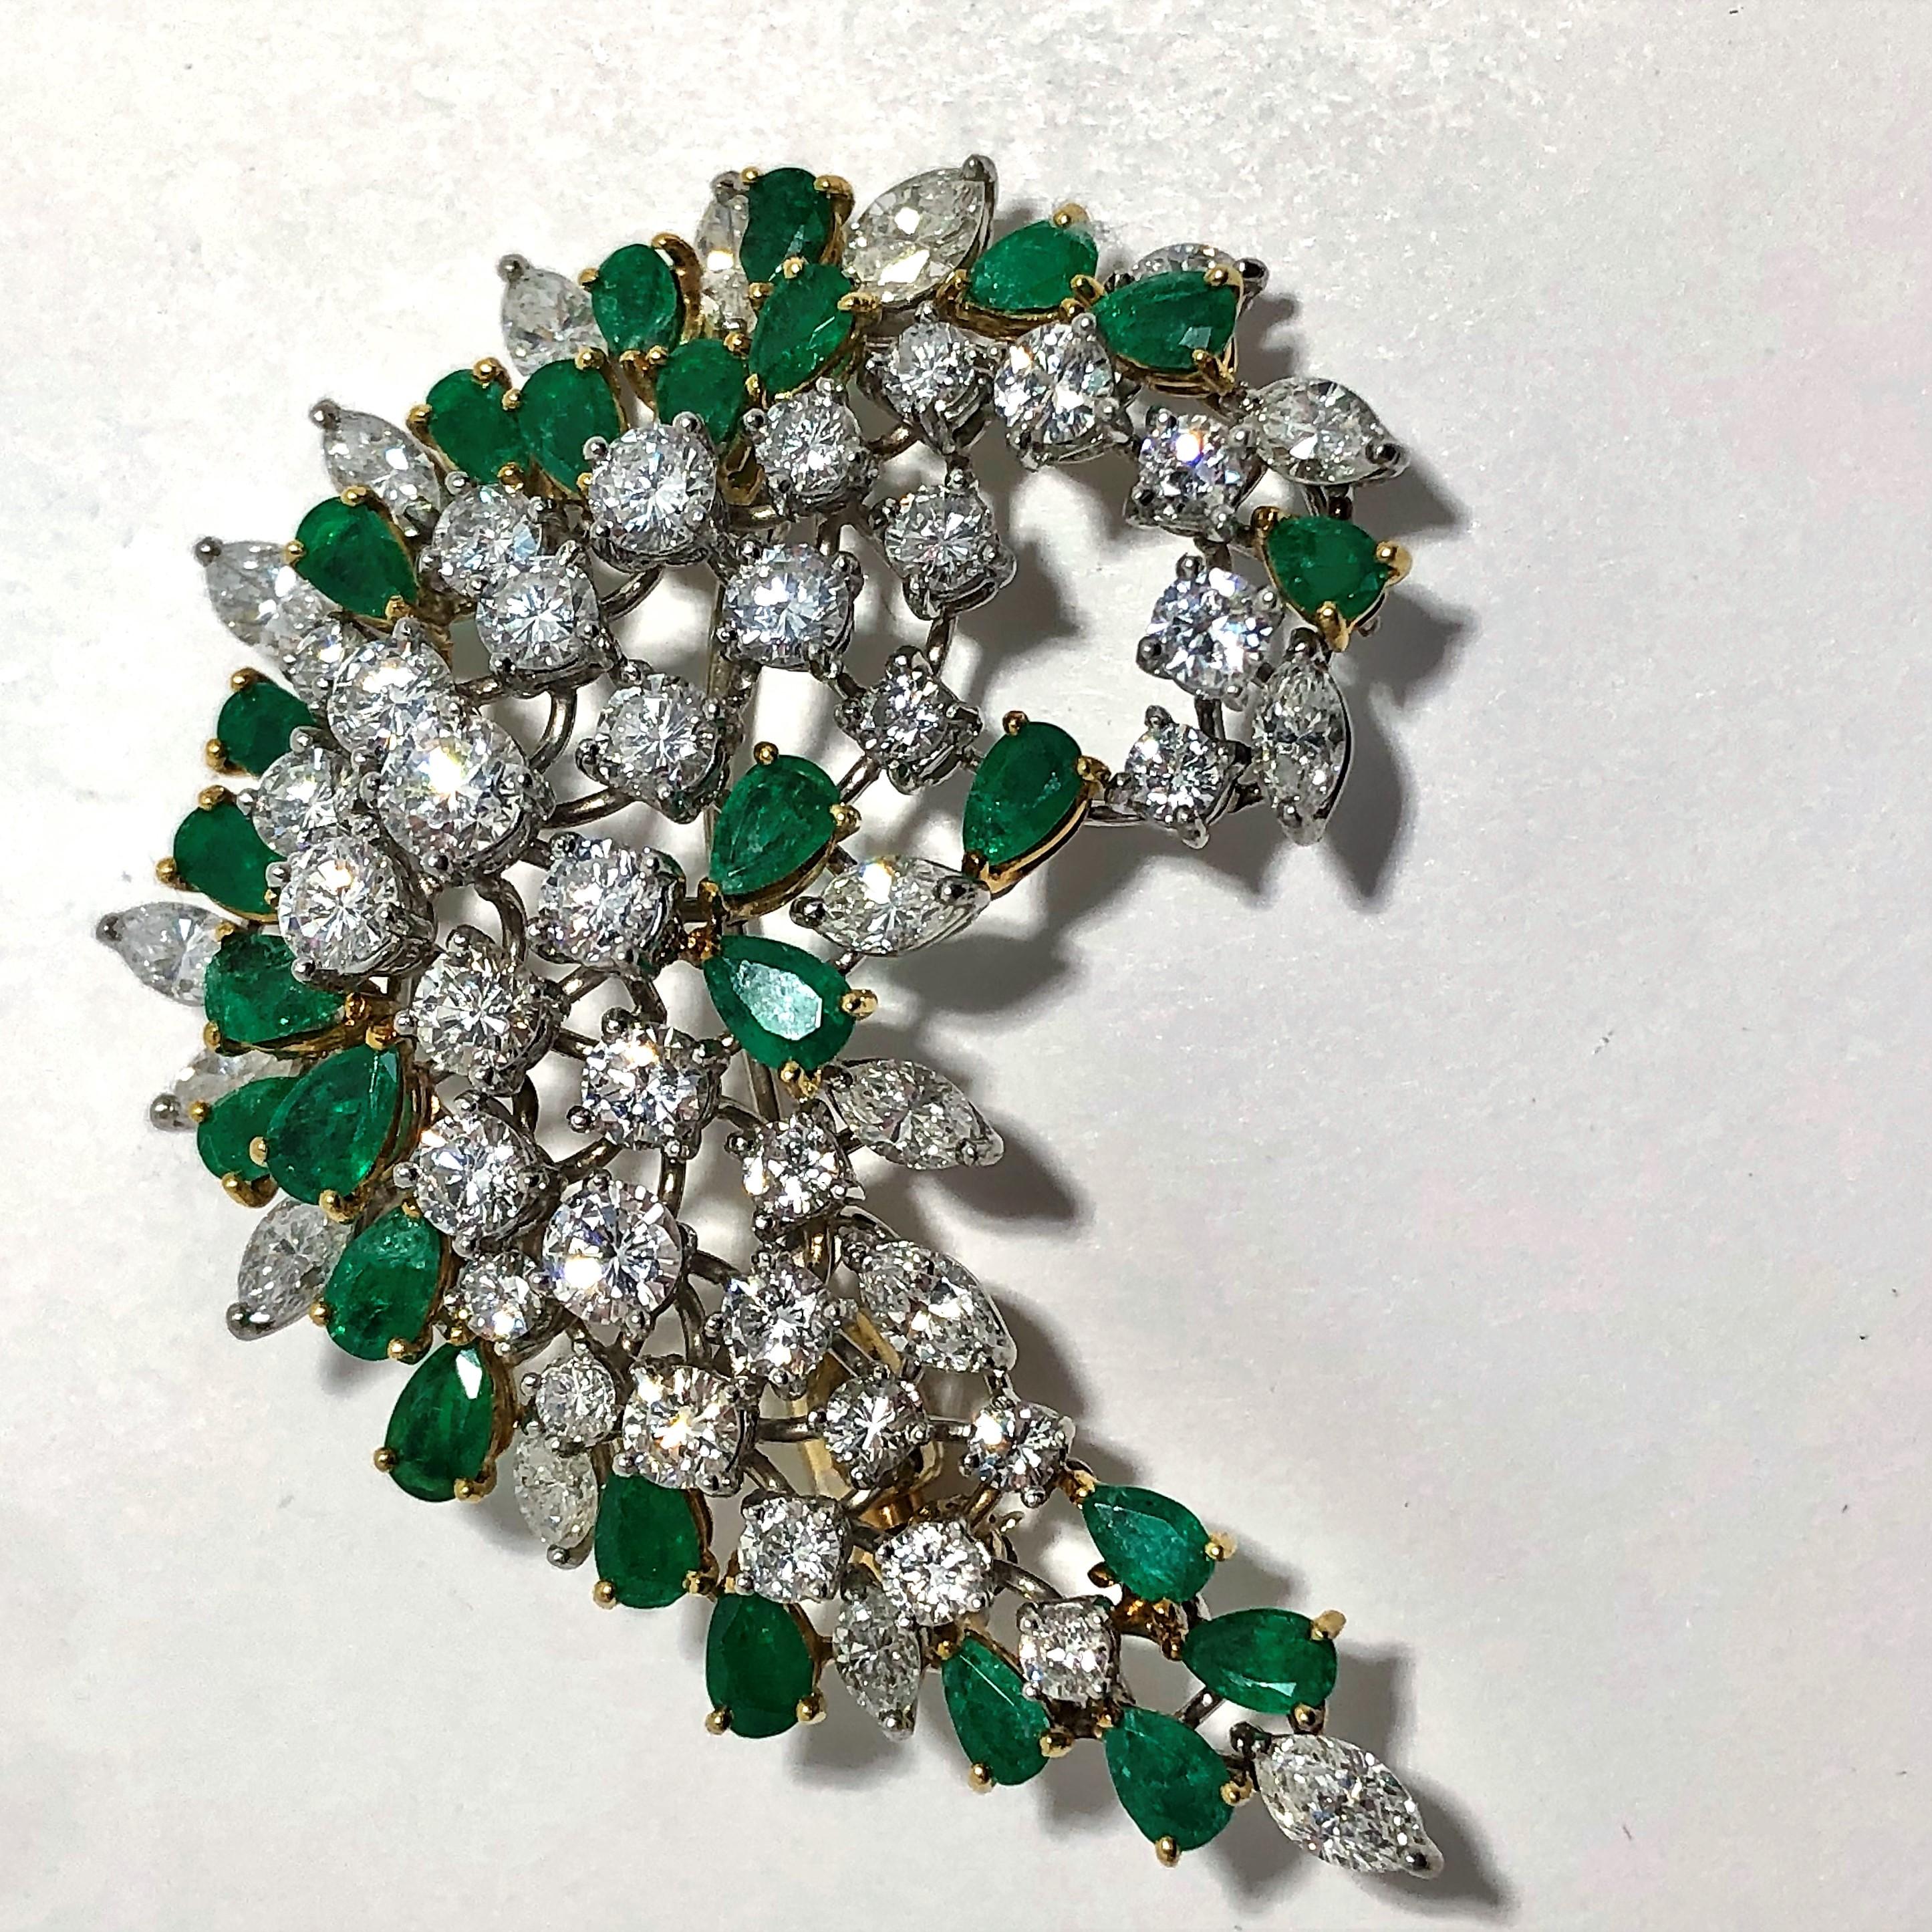 This lovely 1960s, hand made, emerald and diamond swirl brooch by Elwood Van Clief can be worn either as a brooch or as a pendant. Made from platinum and 18k yellow gold, and set with 33 round brilliant cut diamonds, 17 marquise cut diamonds, and 26